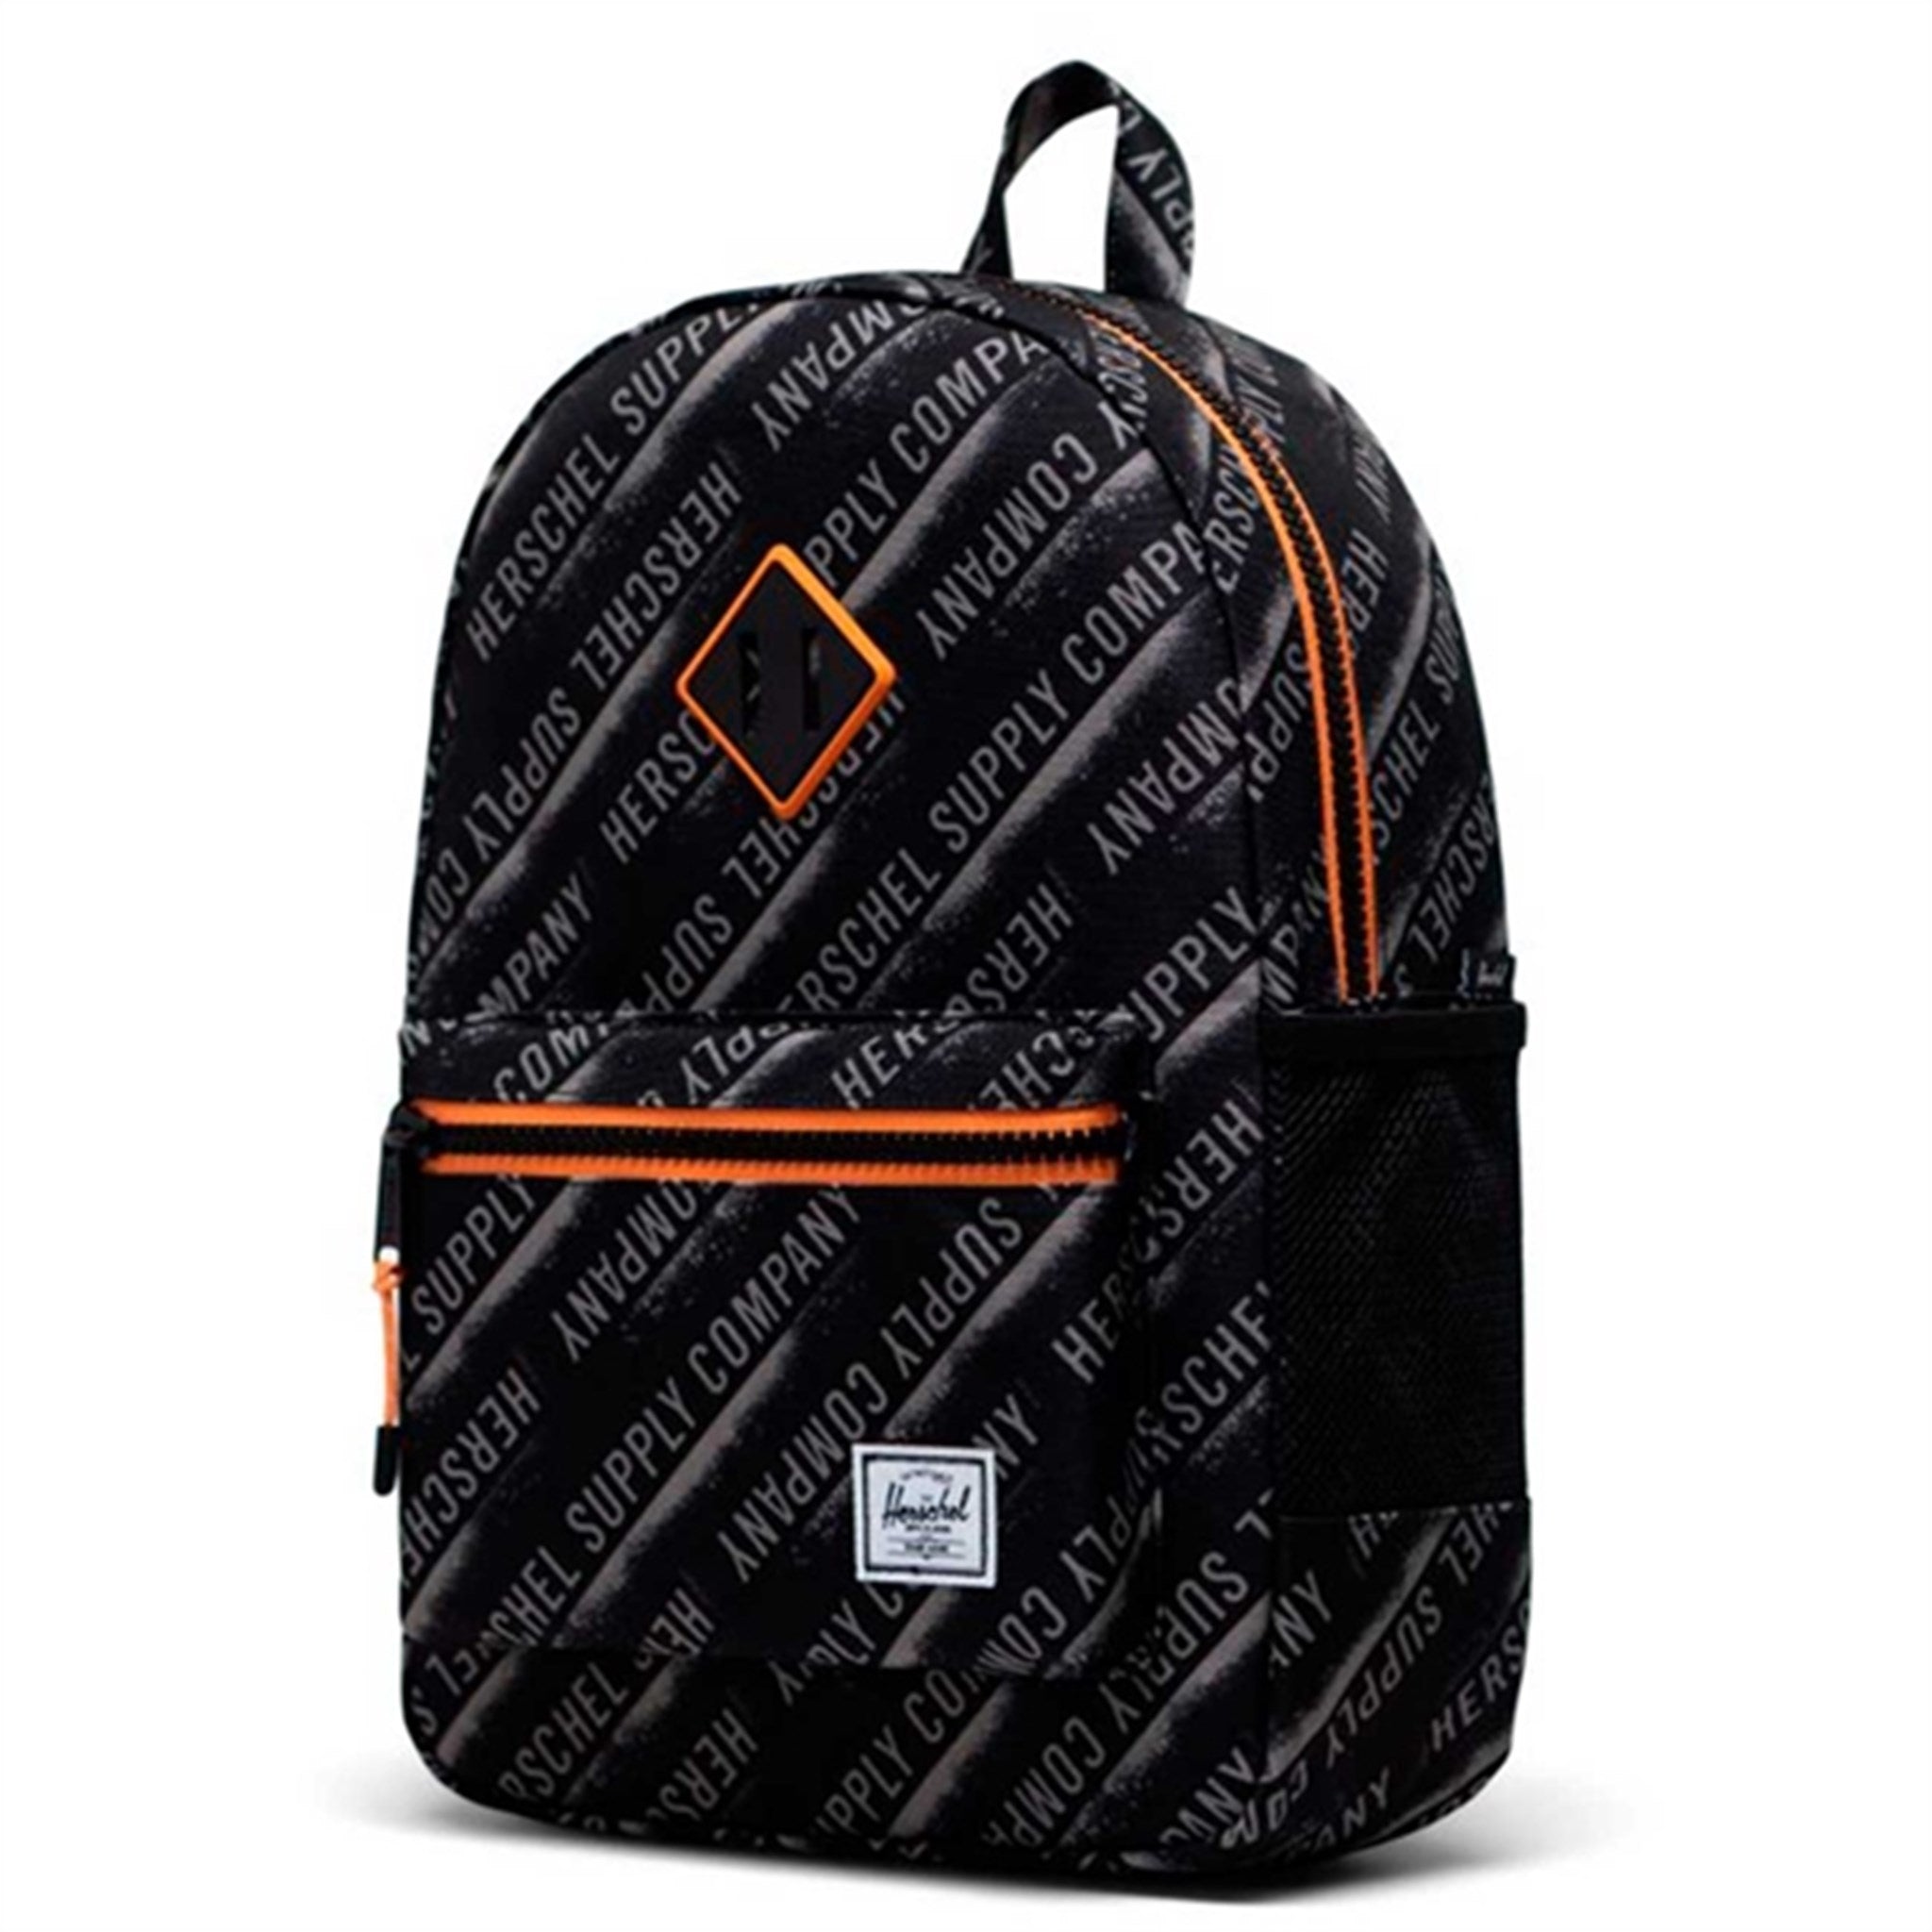 Herschel Backpack Youth Stencil Roll Call/Orange Popsicle 3